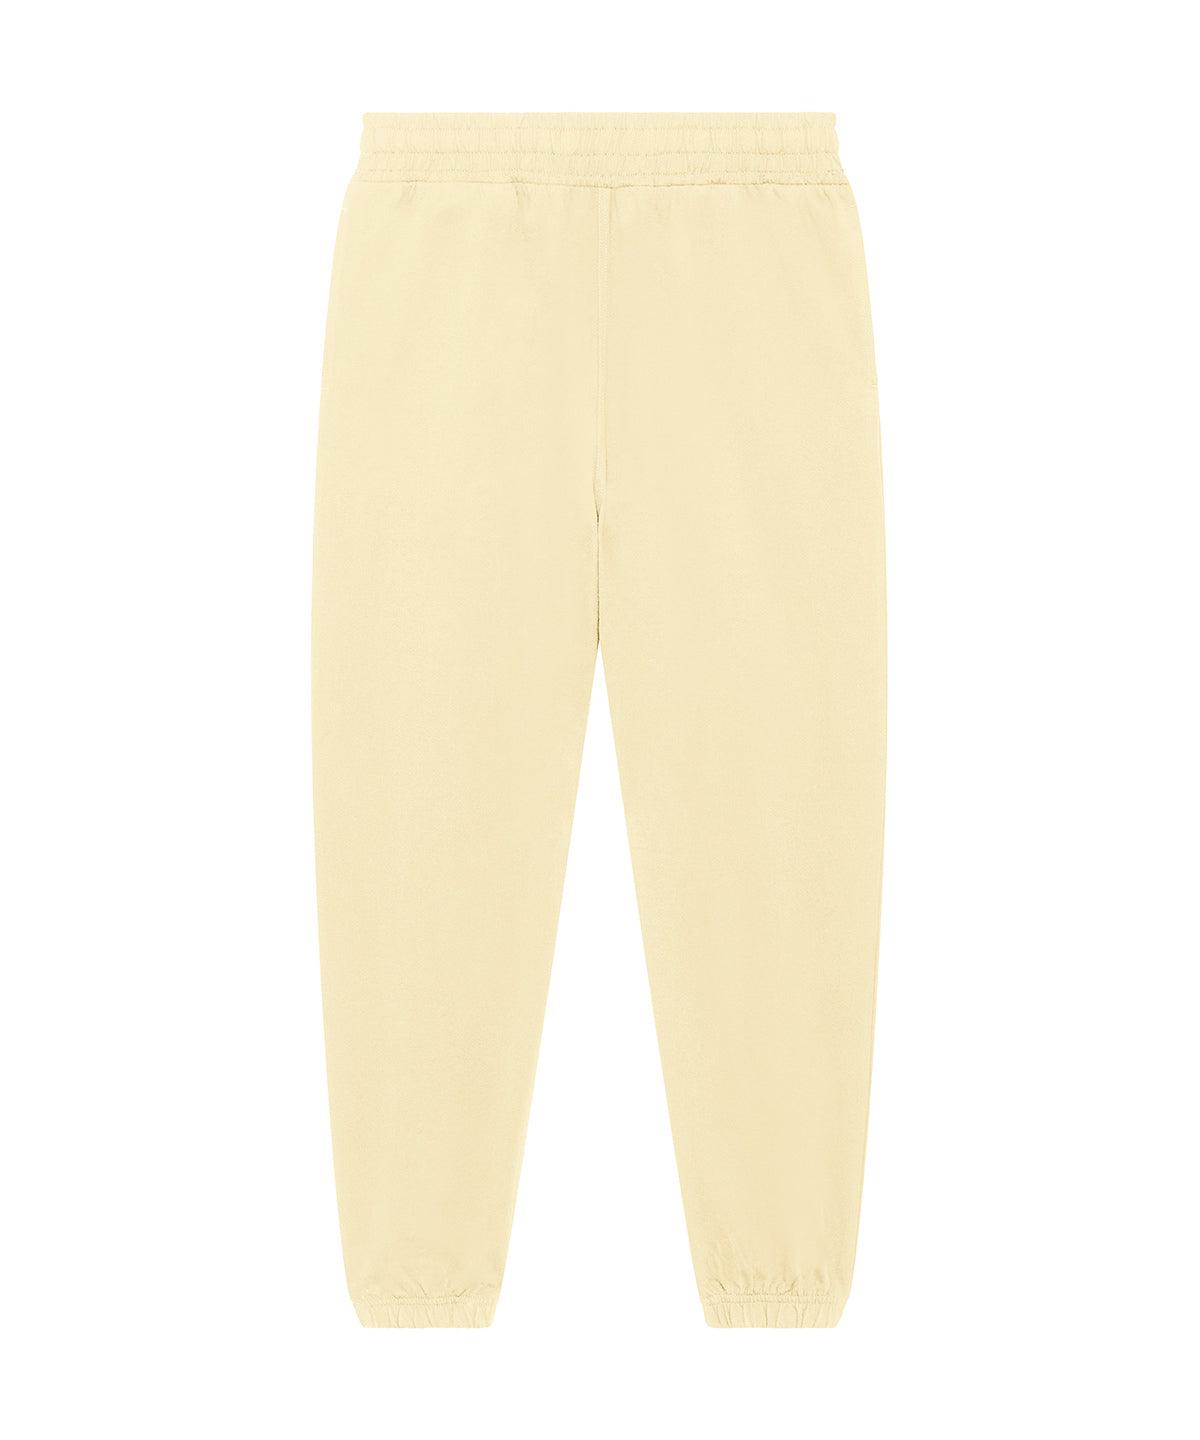 Butter - Decker terry relaxed fit jogger pants (STBU587) Sweatpants Stanley/Stella Exclusives, Joggers, New Styles For 2022, Organic & Conscious, Stanley/ Stella Schoolwear Centres